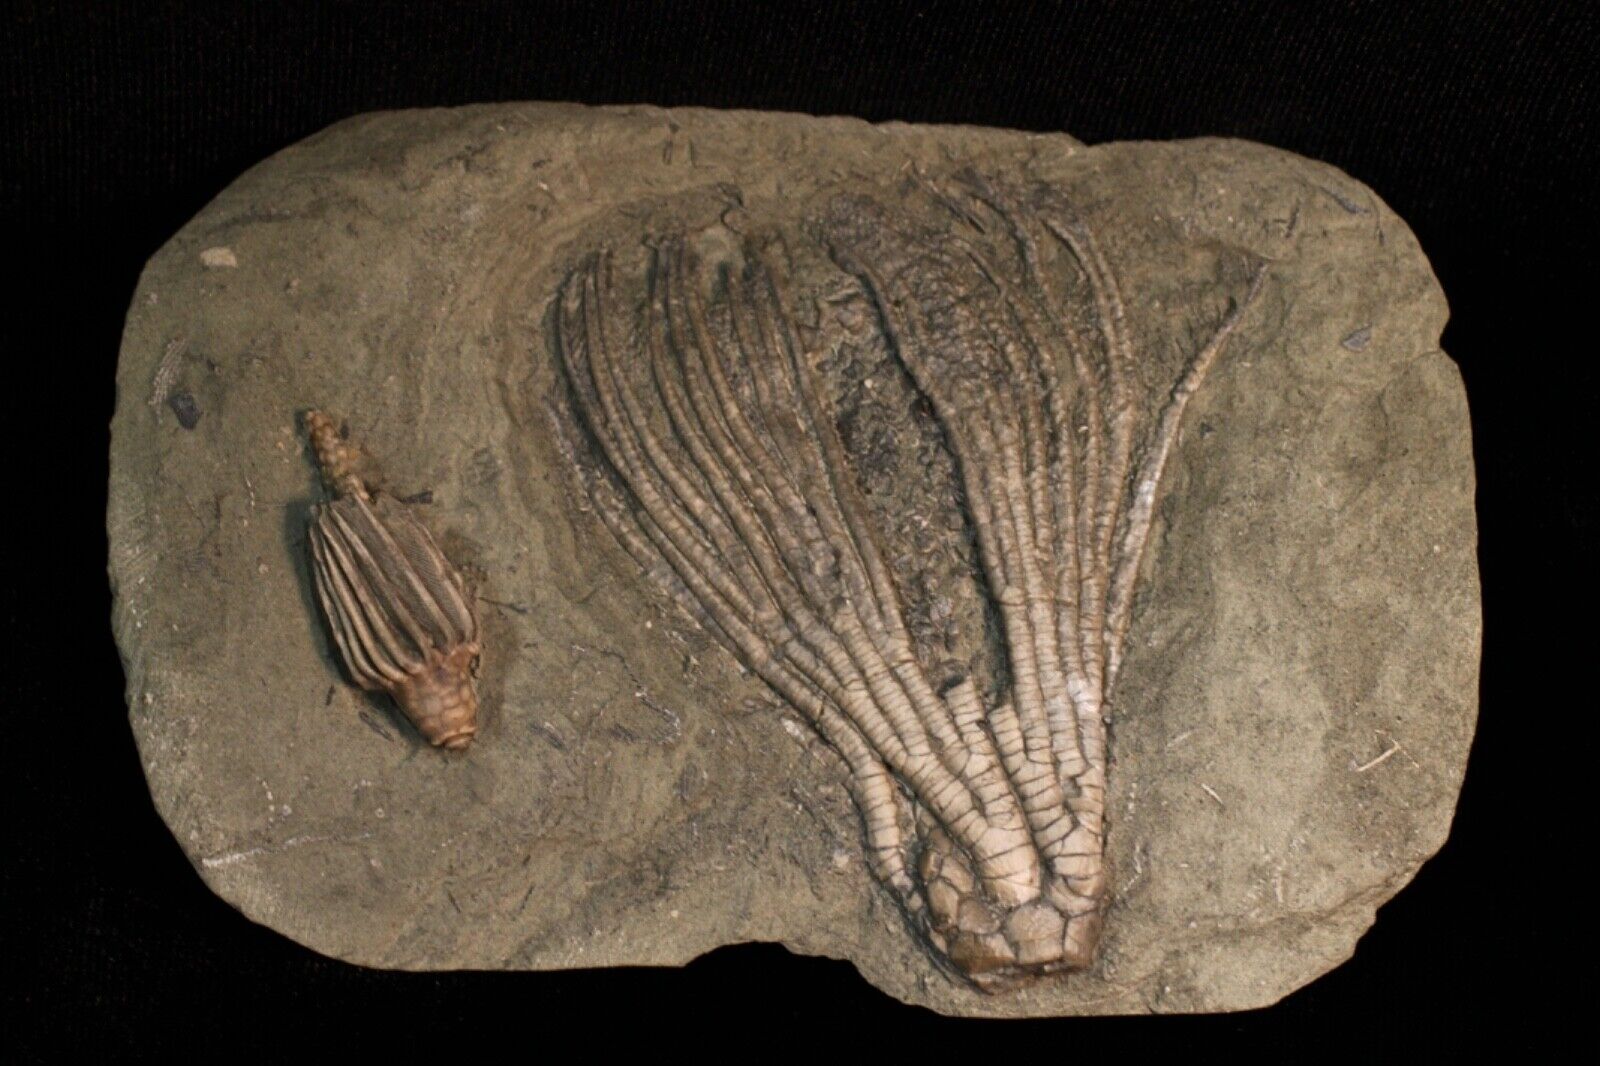 Two-Faced Fossil Crinoid, Crawfordsville, Indiana